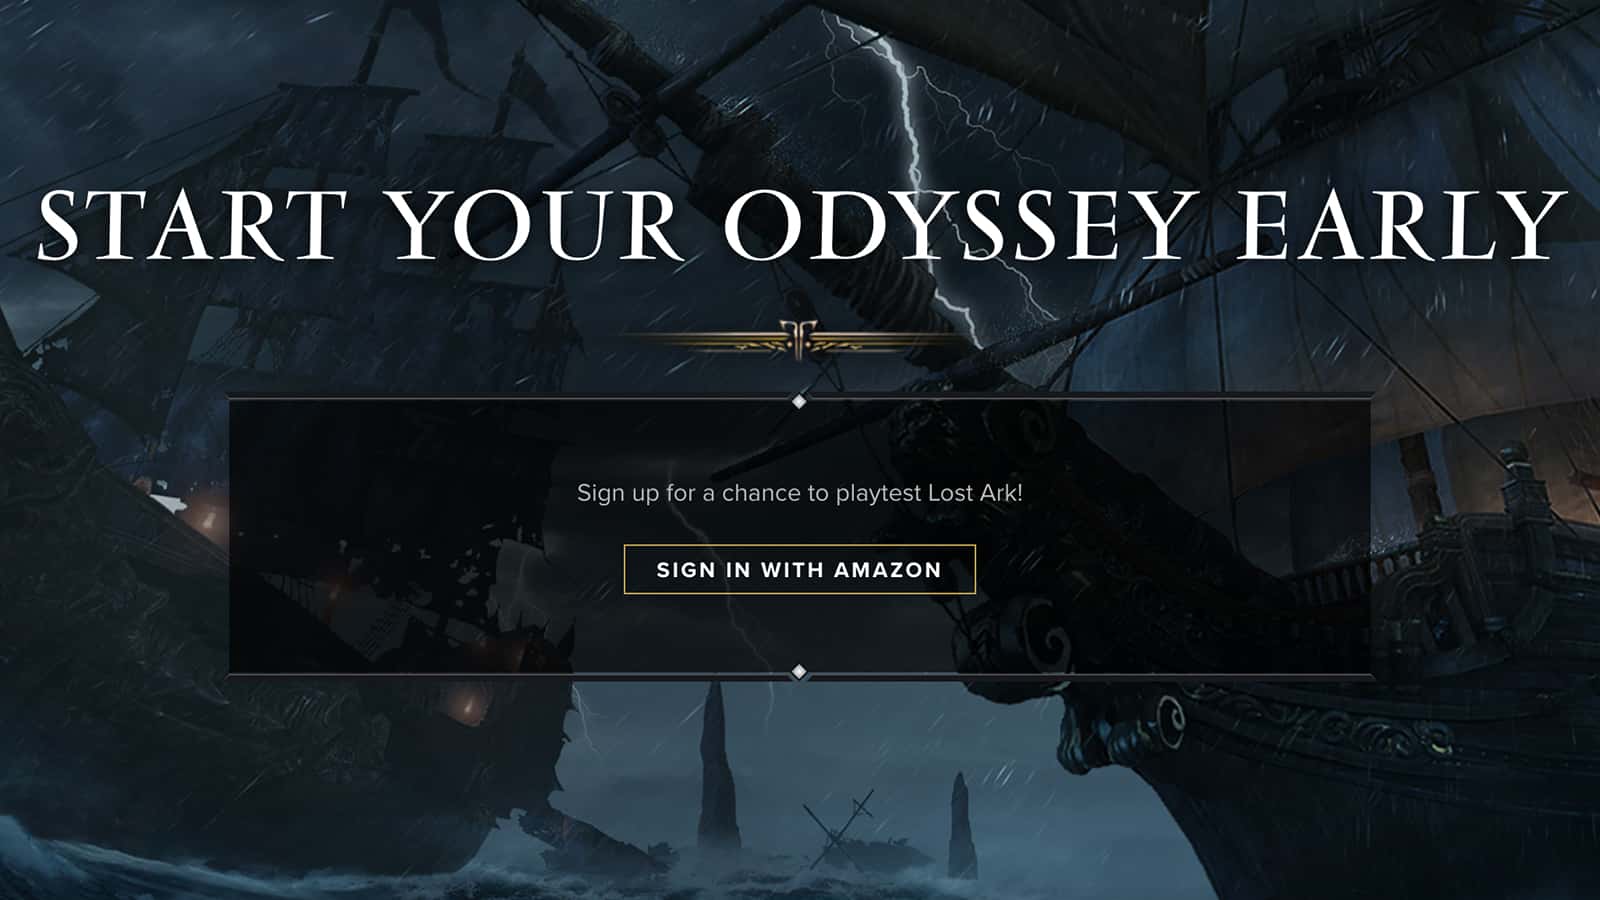 The sign-up screen for the Lost Ark closed beta